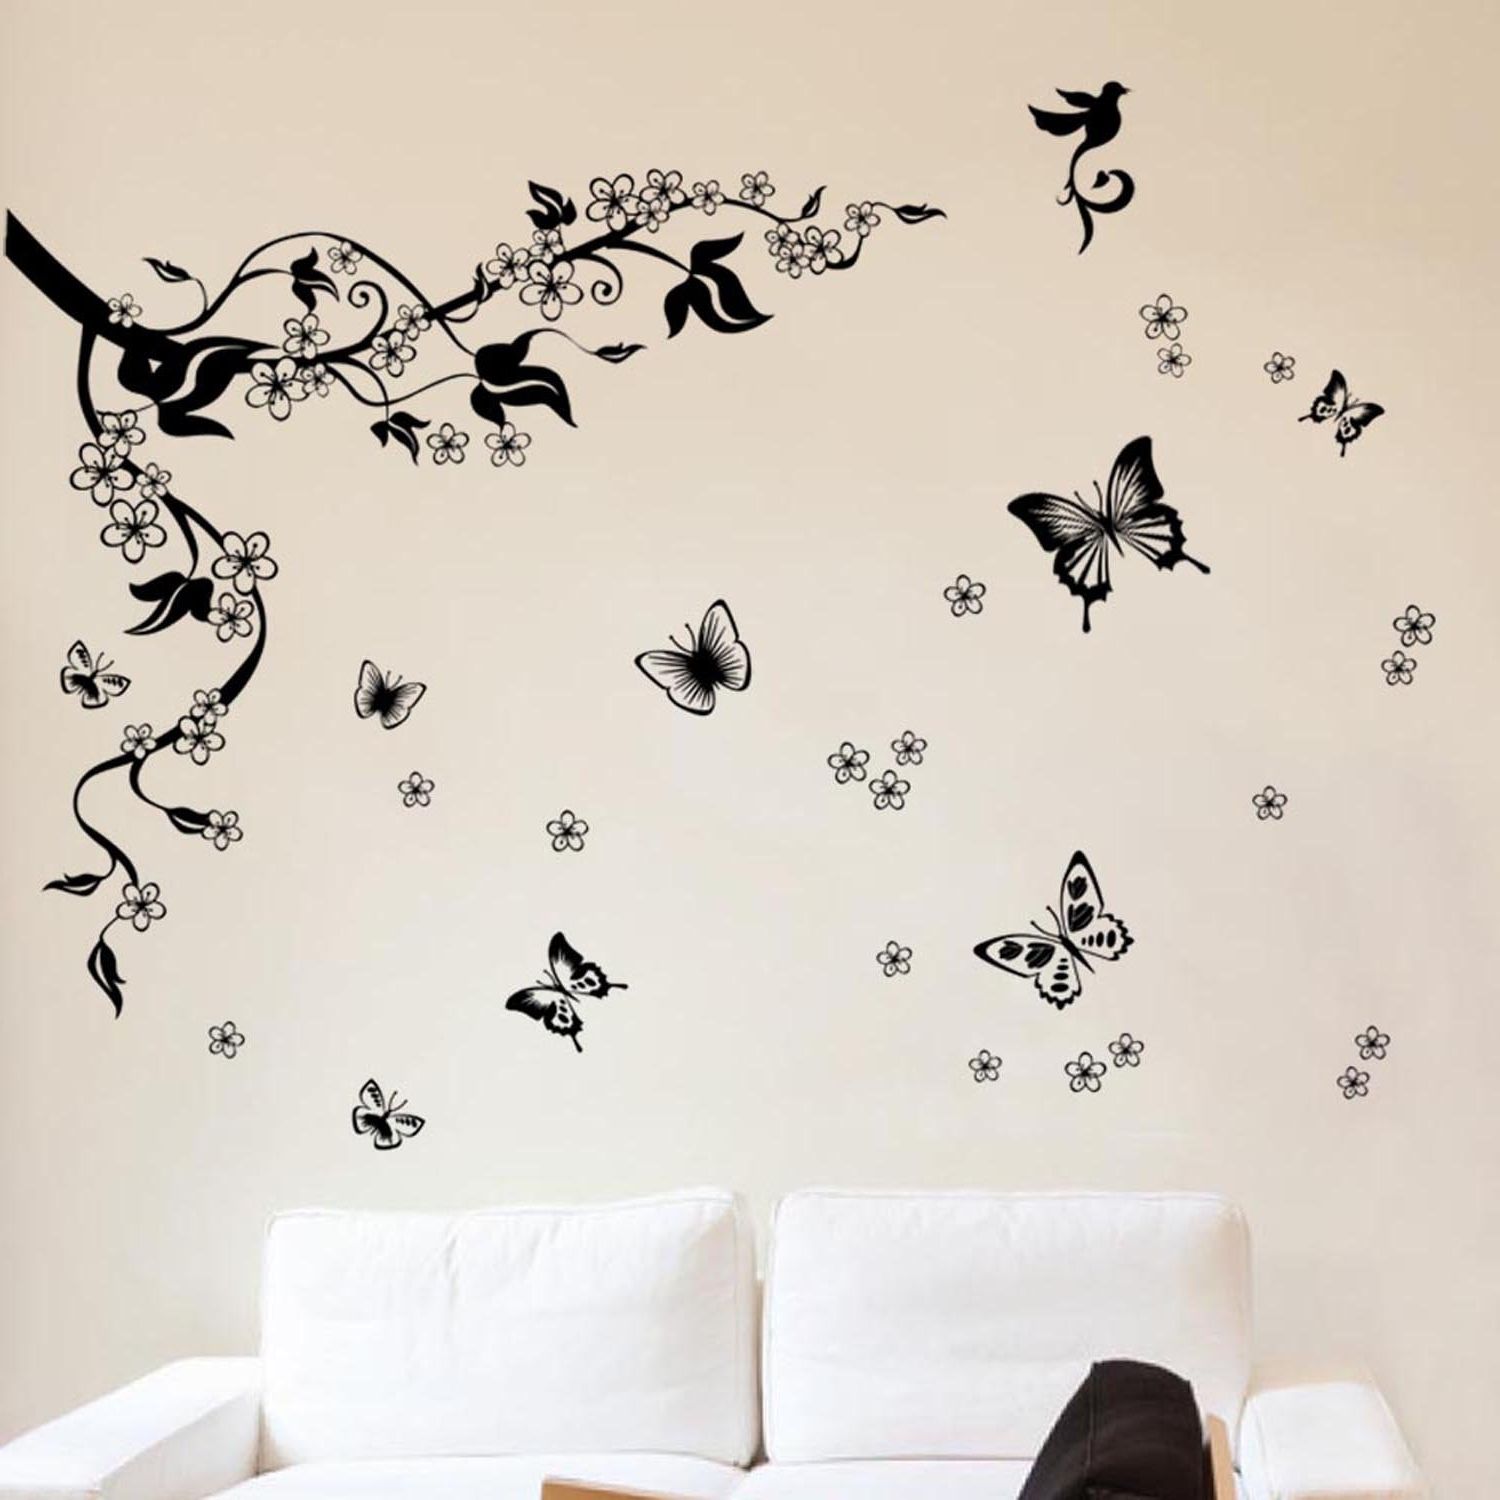 Well Known Wall Art Stickers Intended For Removable Wall Art Stickers: Amazon.co (View 12 of 15)